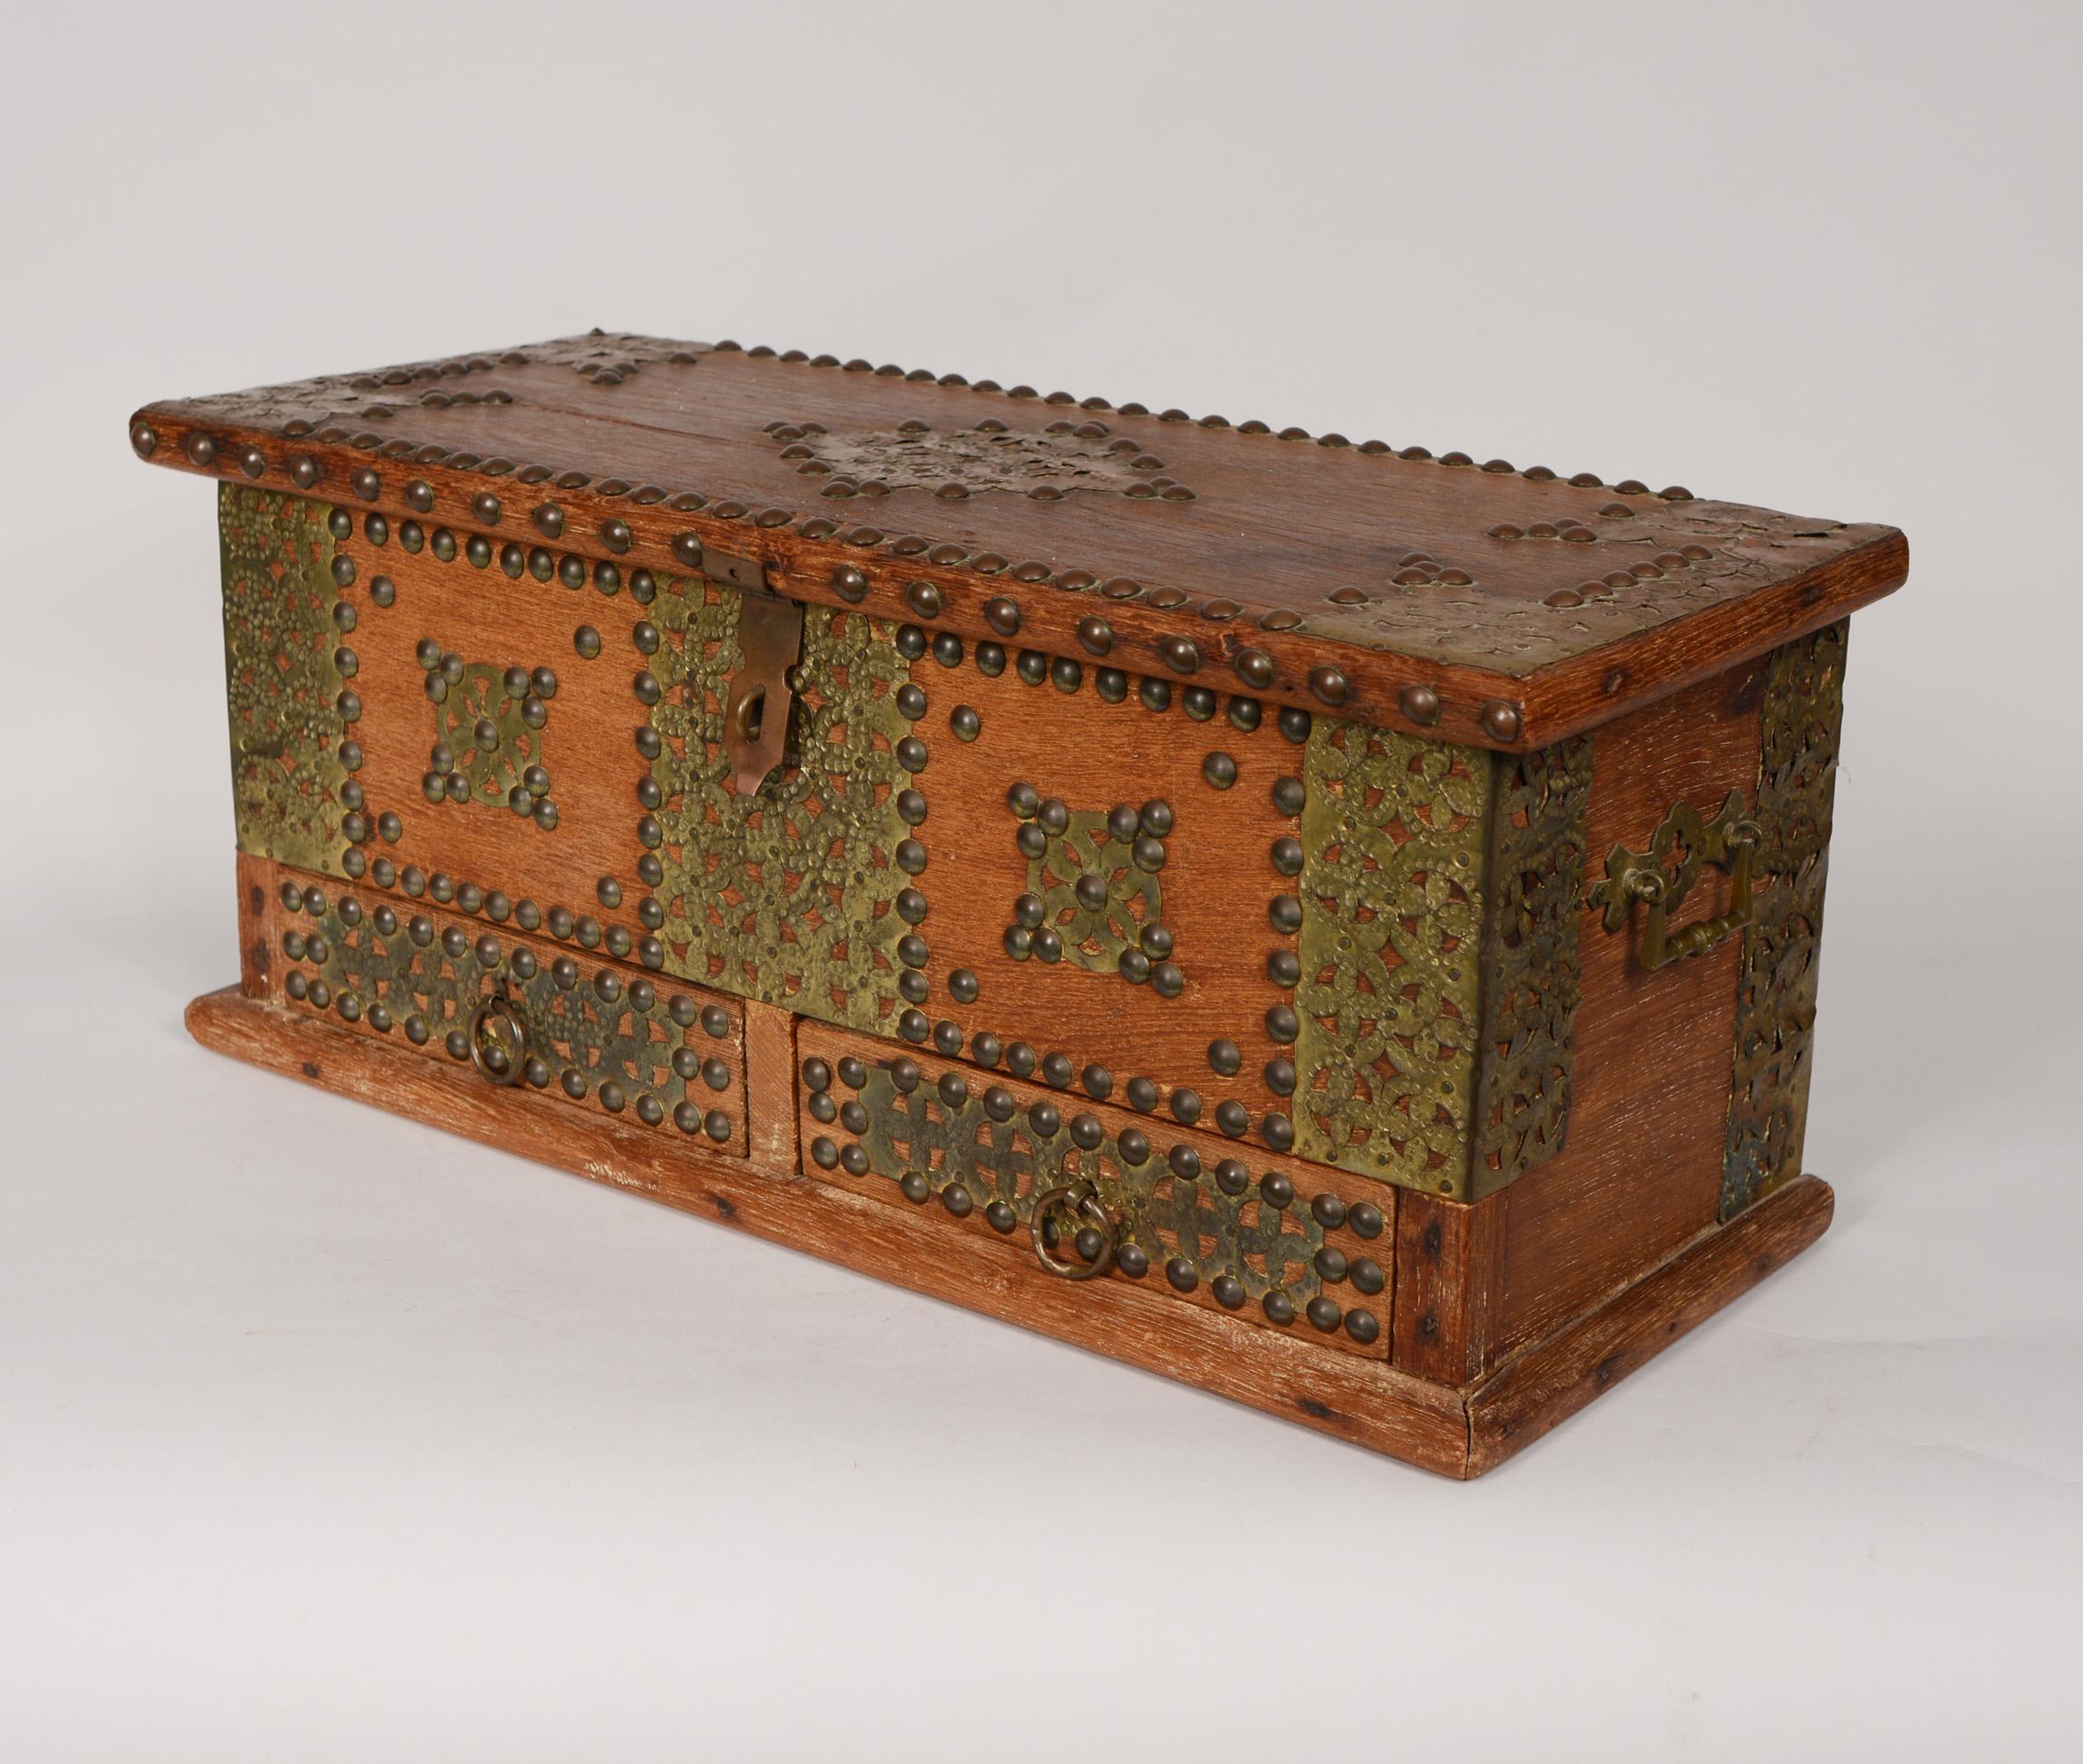 Small teak Zanzibar chest with brass studs. The chest has two compartments under the lid and two small drawers at the bottom. This was collected in Africa in the 1960's.